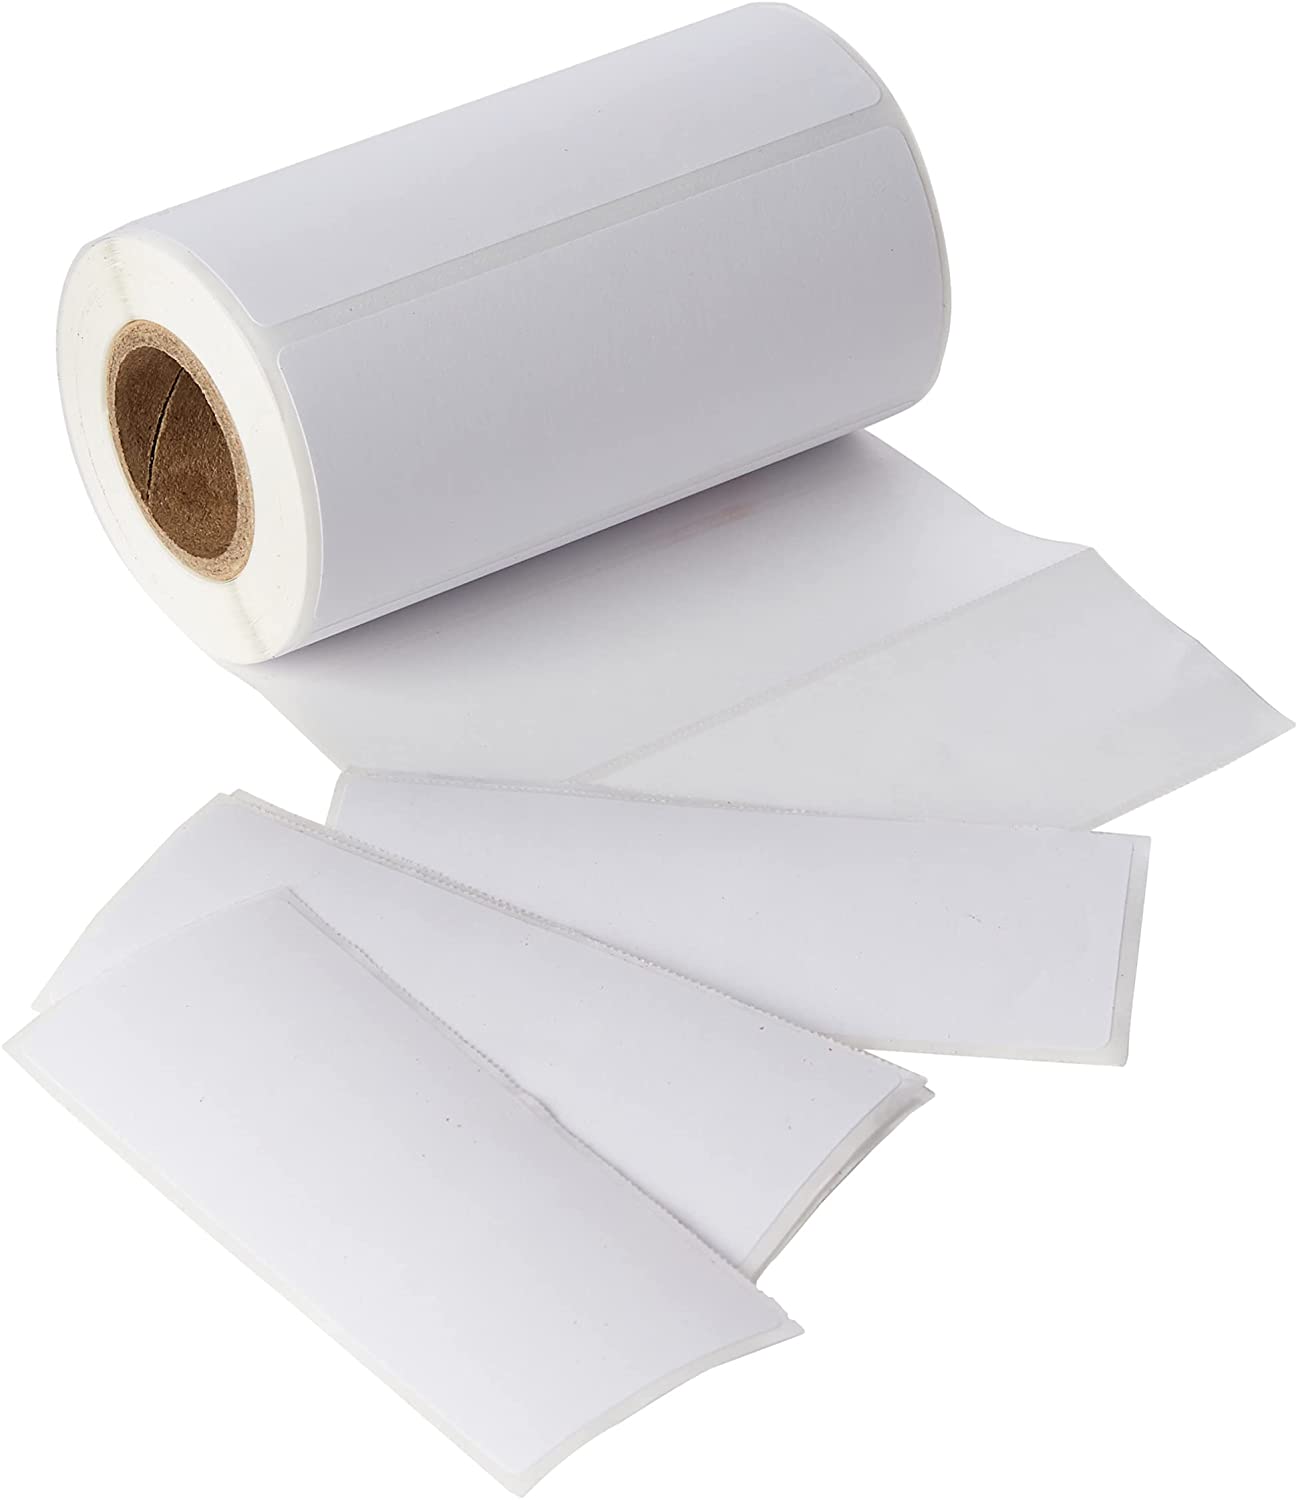 Roll of 250 Address Labels Self Adhesive 89x36mm White